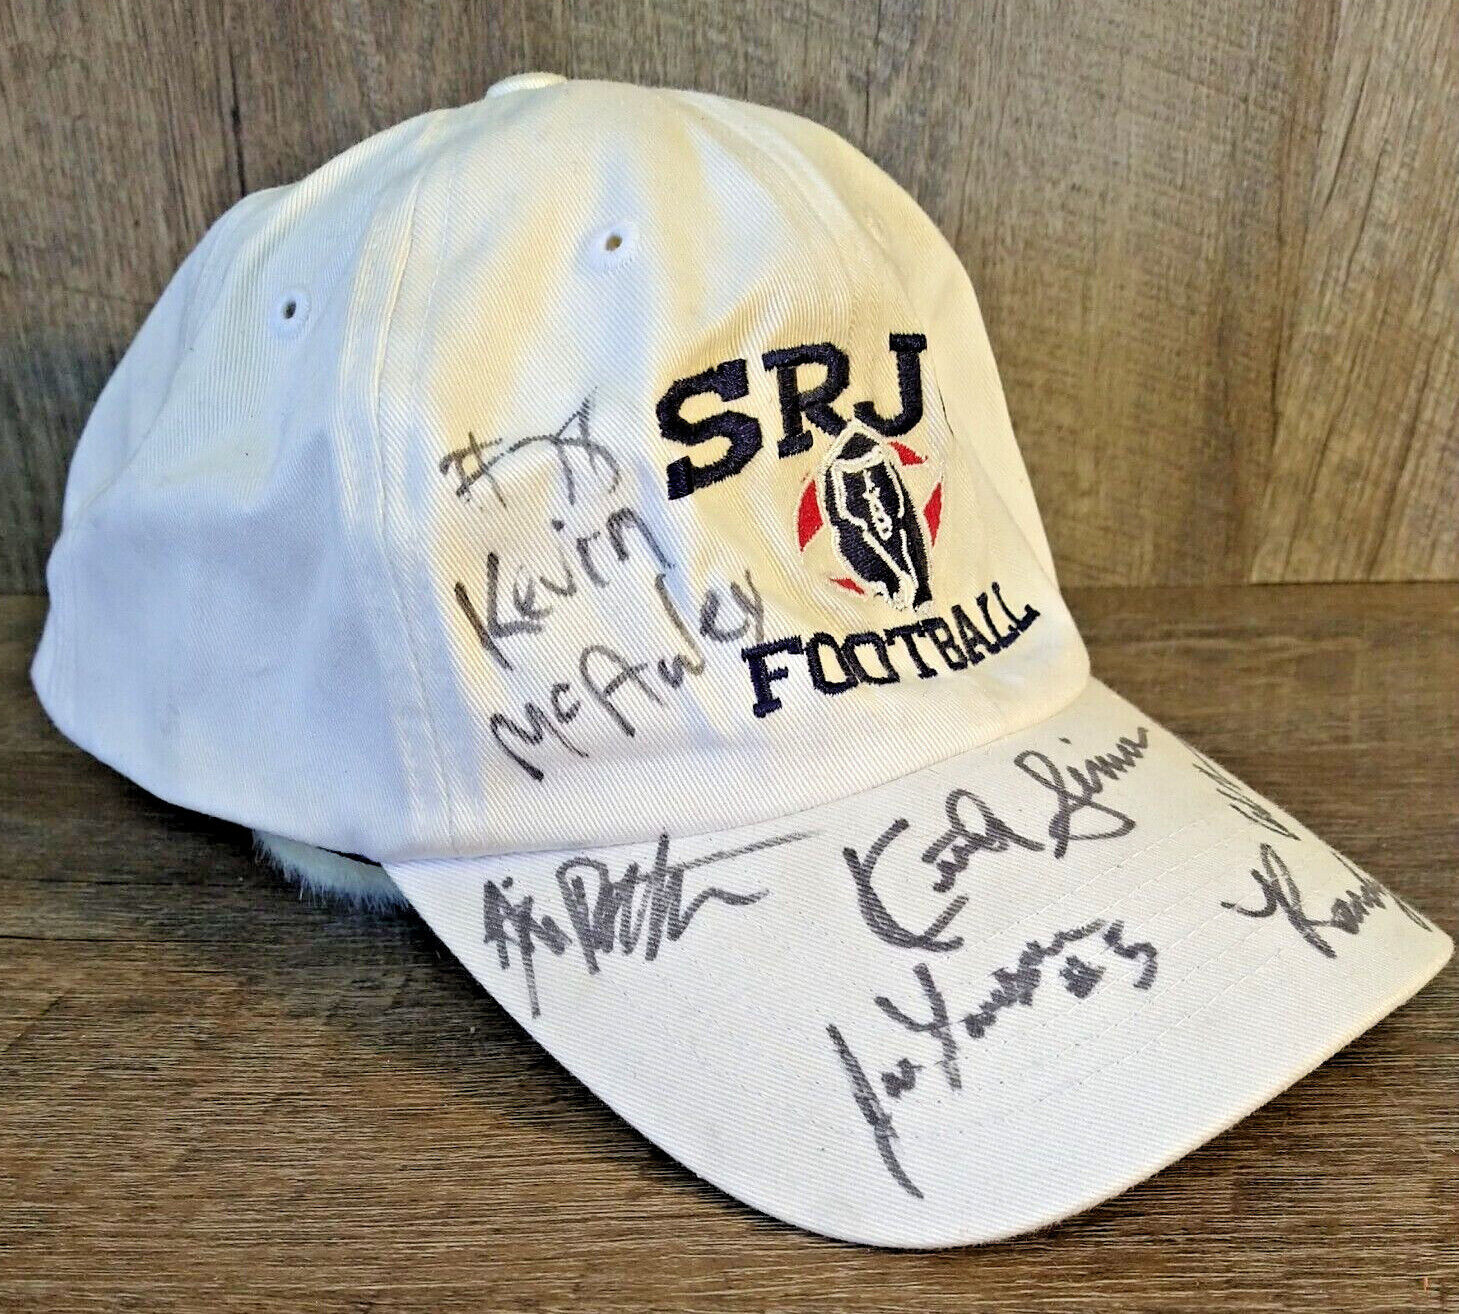 Santa Rosa Junior College-srjc Football- Players Signed Autographed Hat Not Worn